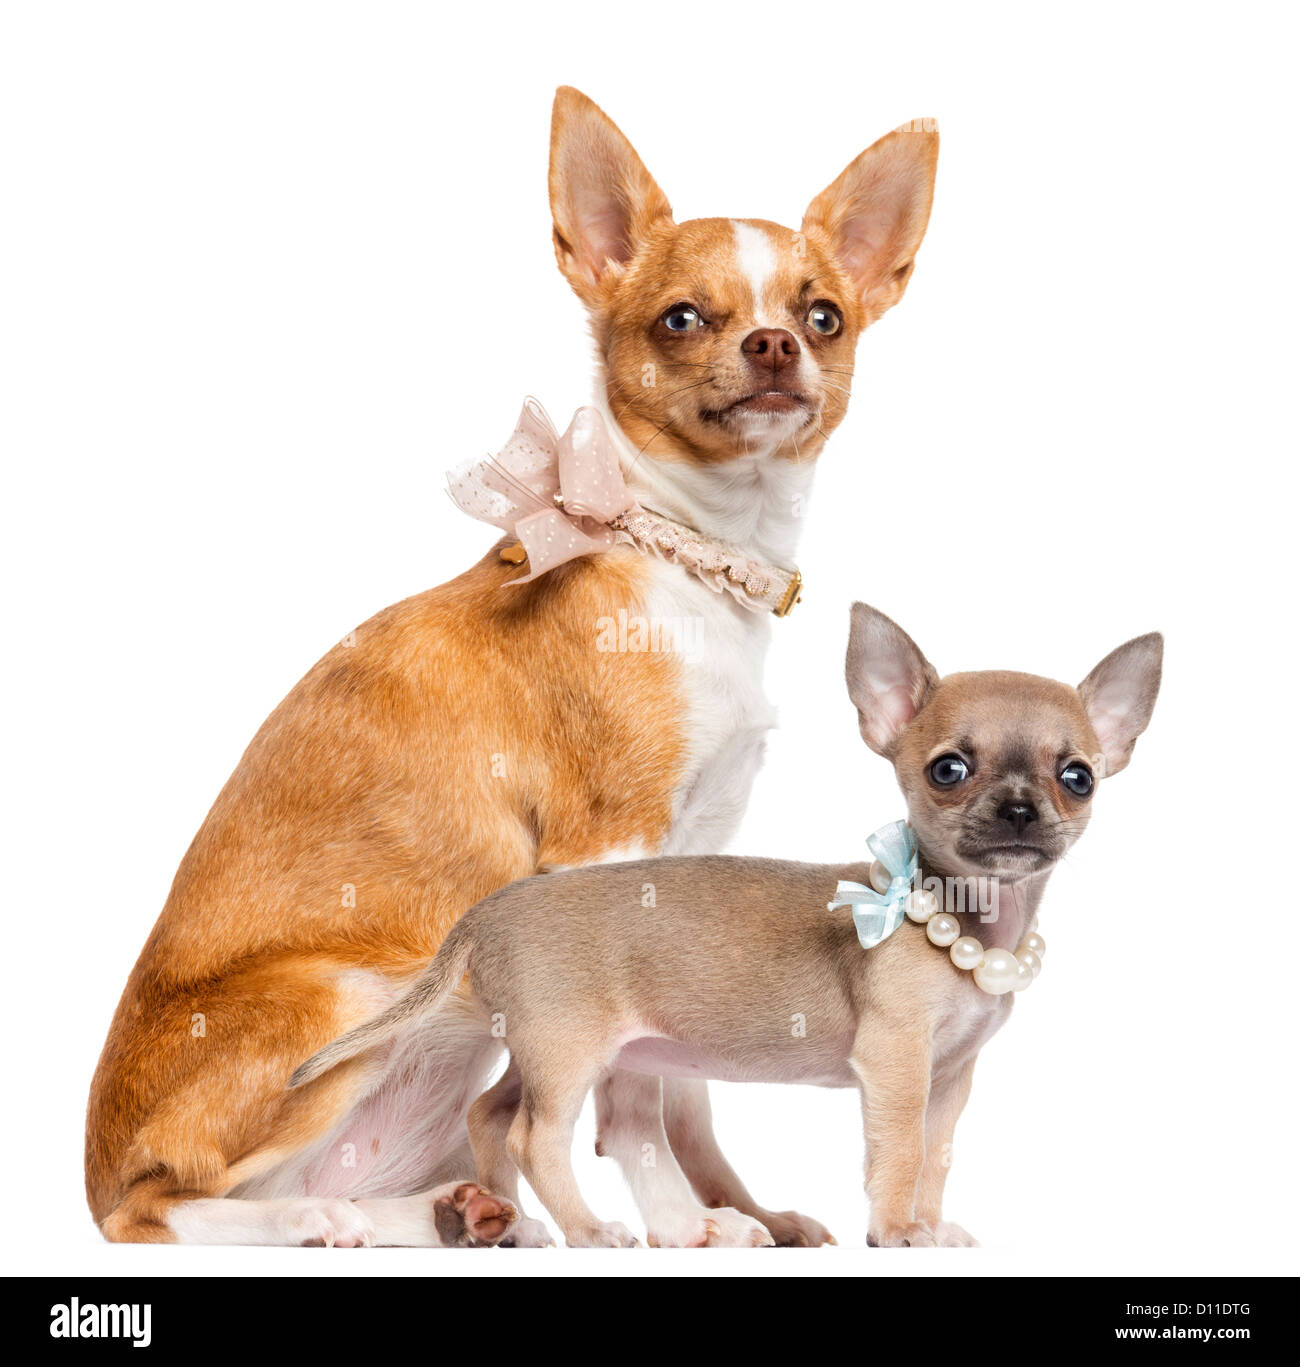 Two Chihuahua puppies, 4 and 7 months old, sitting and wearing pearl and lace collars against white background Stock Photo